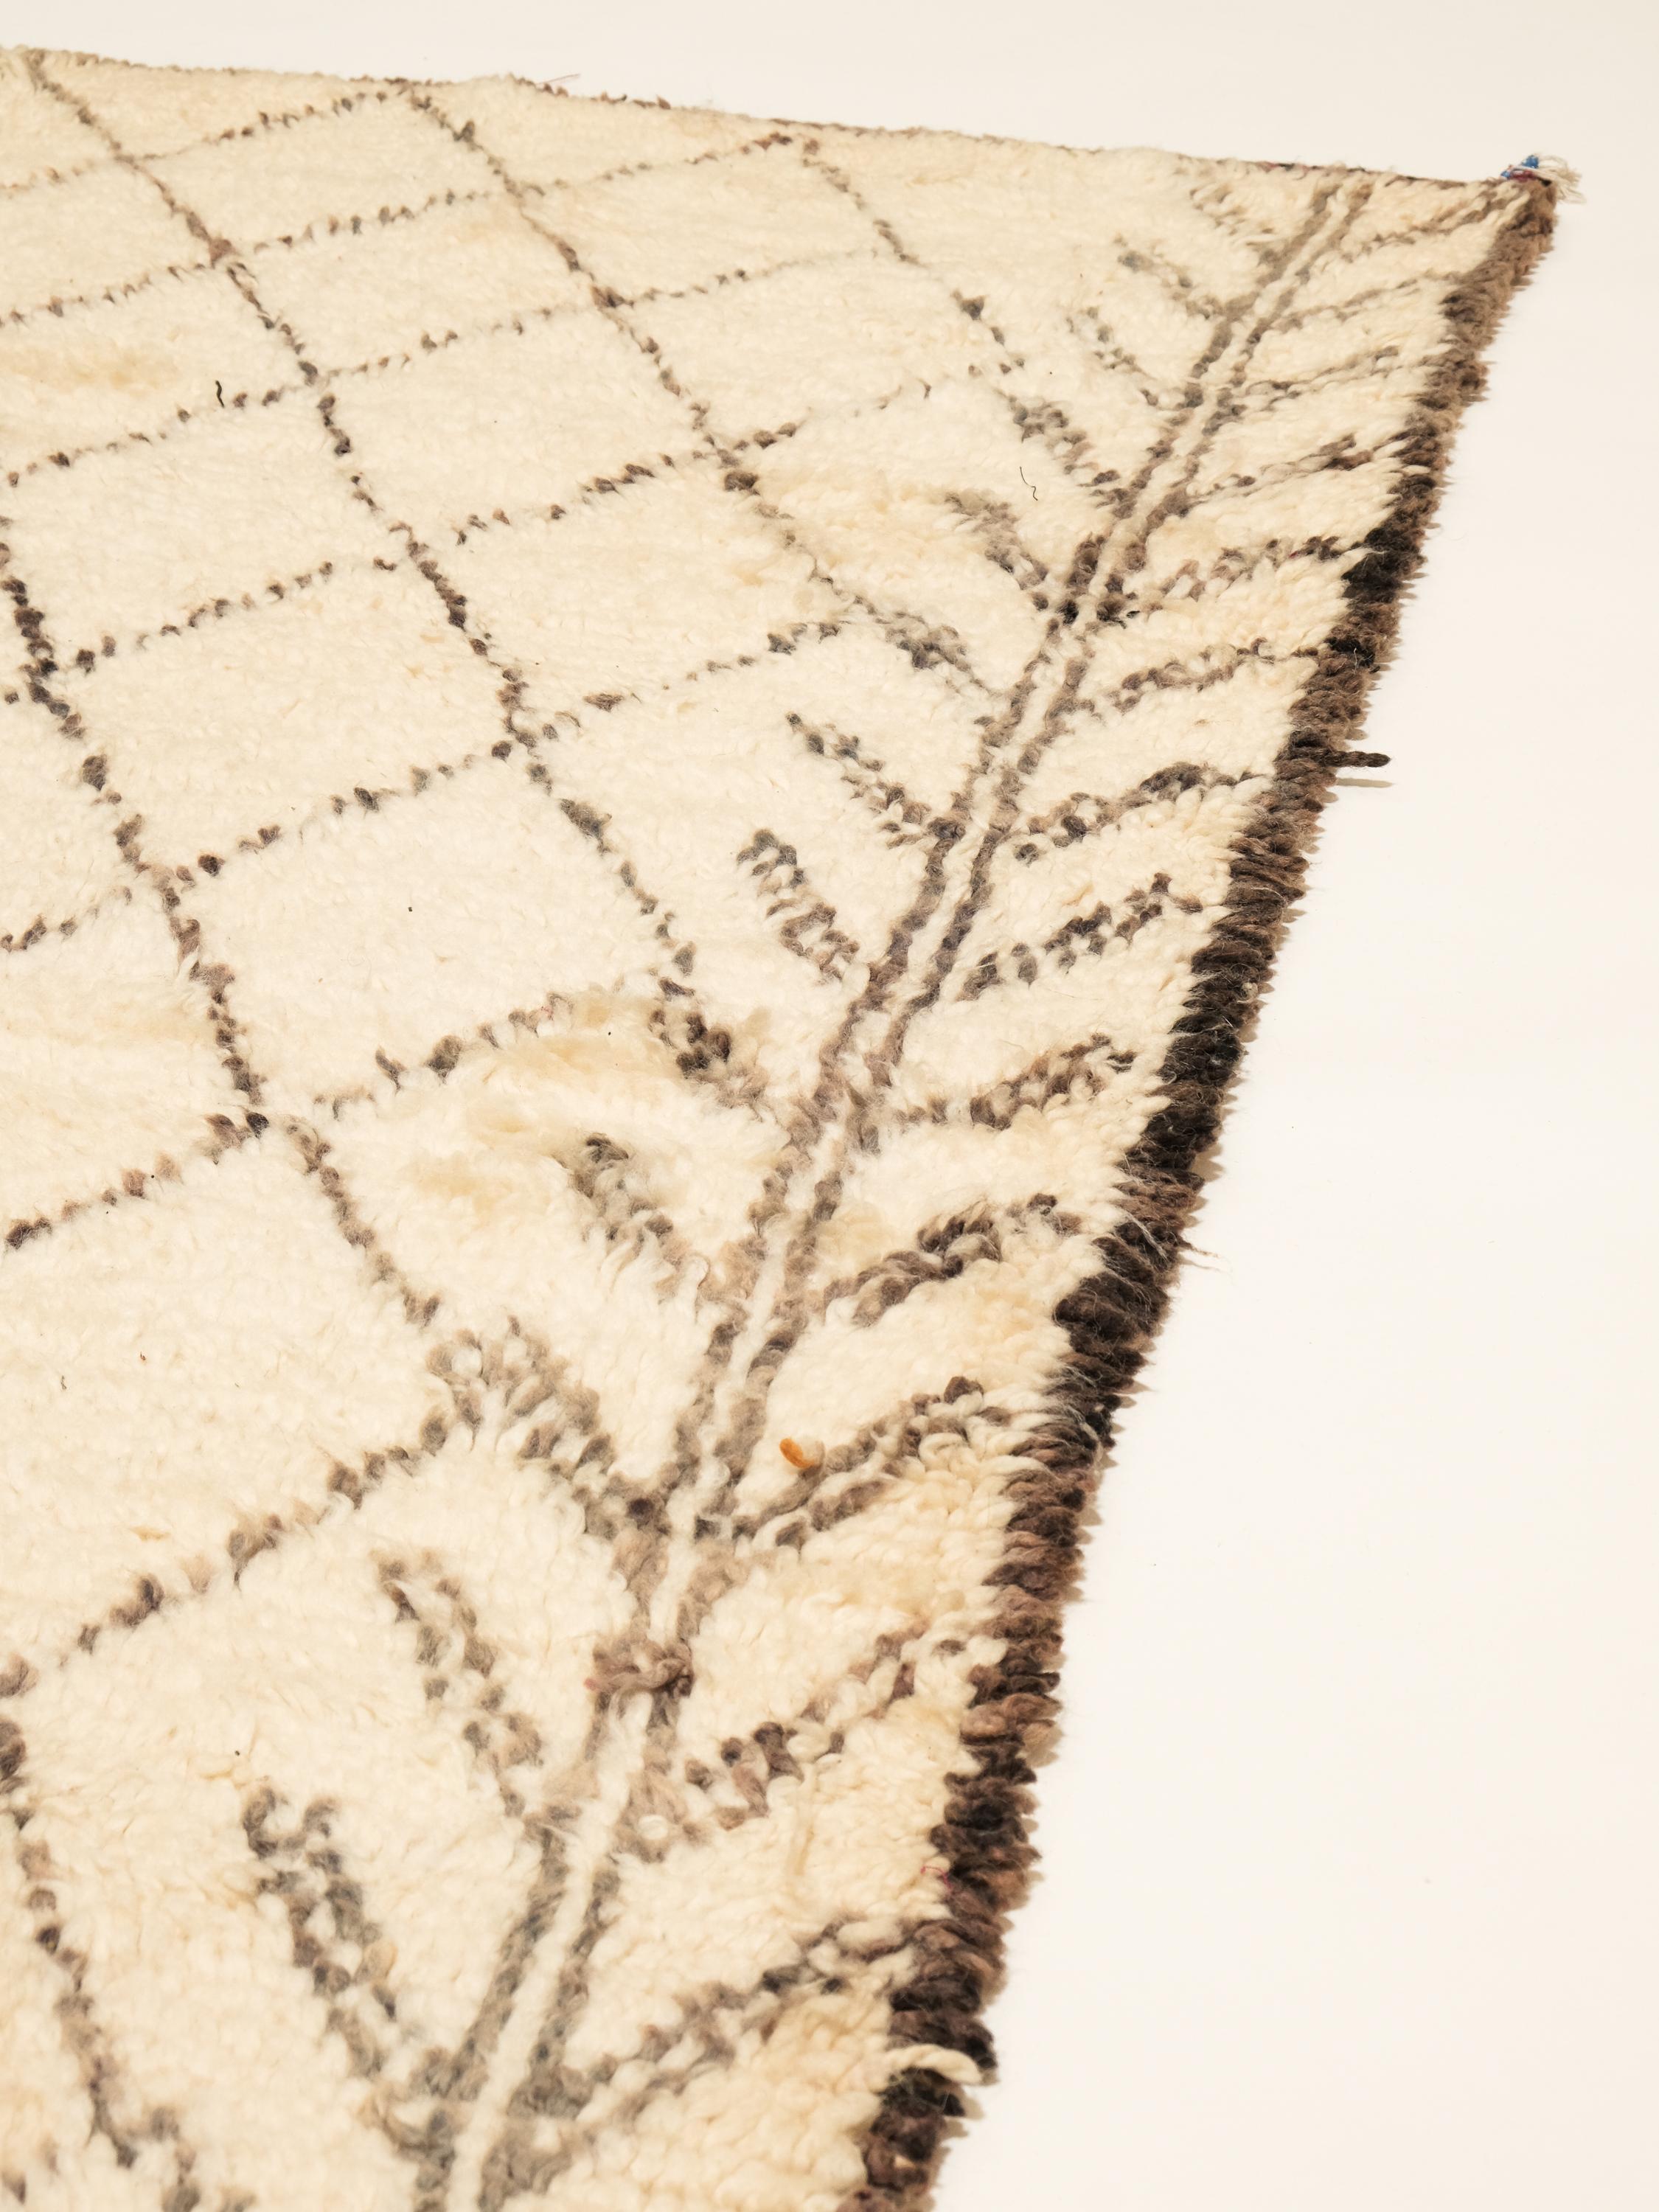 A beautiful vintage Moroccan rug from the Beni Ourain tribe. This charming handwoven wool piece has the perfect sandy ivory color and contains traditional diamond and leaf motifs throughout the field in a golden hue. A one of a kind rug that will